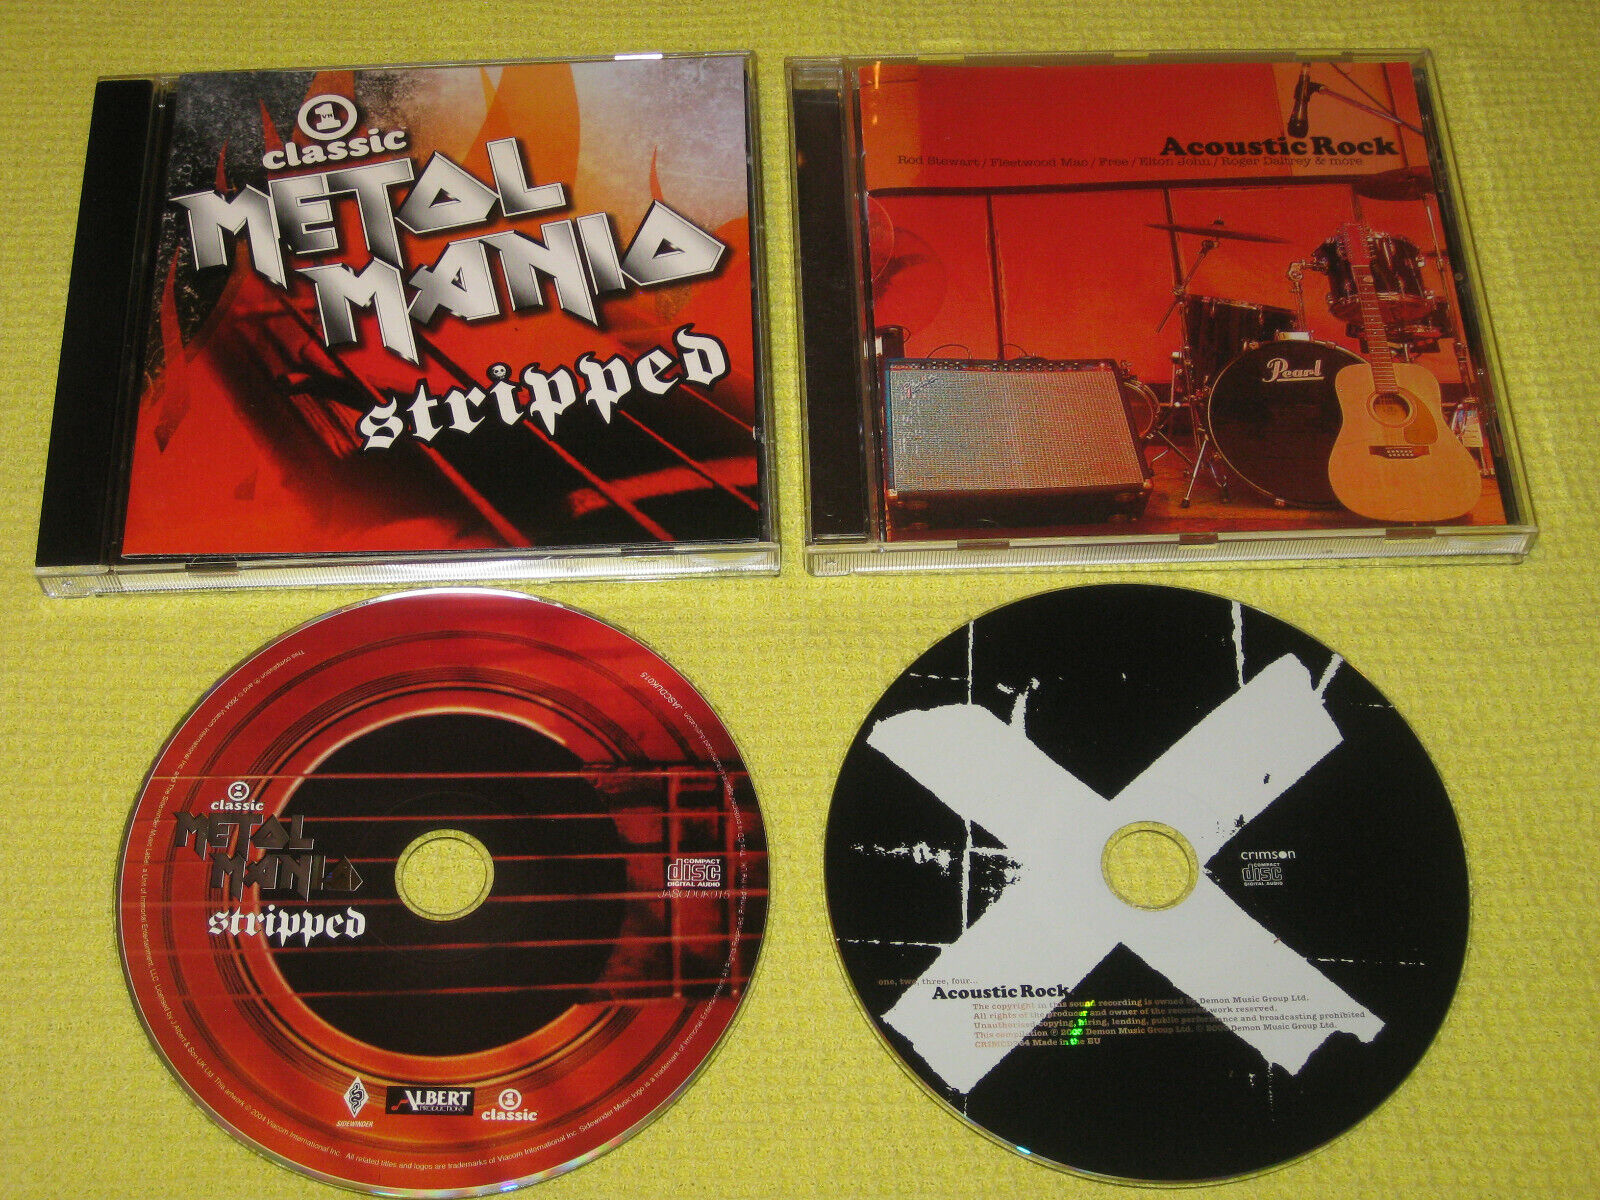 Classic Metal Mania Stripped & Acoustic Rock 2 CD Albums Marillion Scorpions Fre